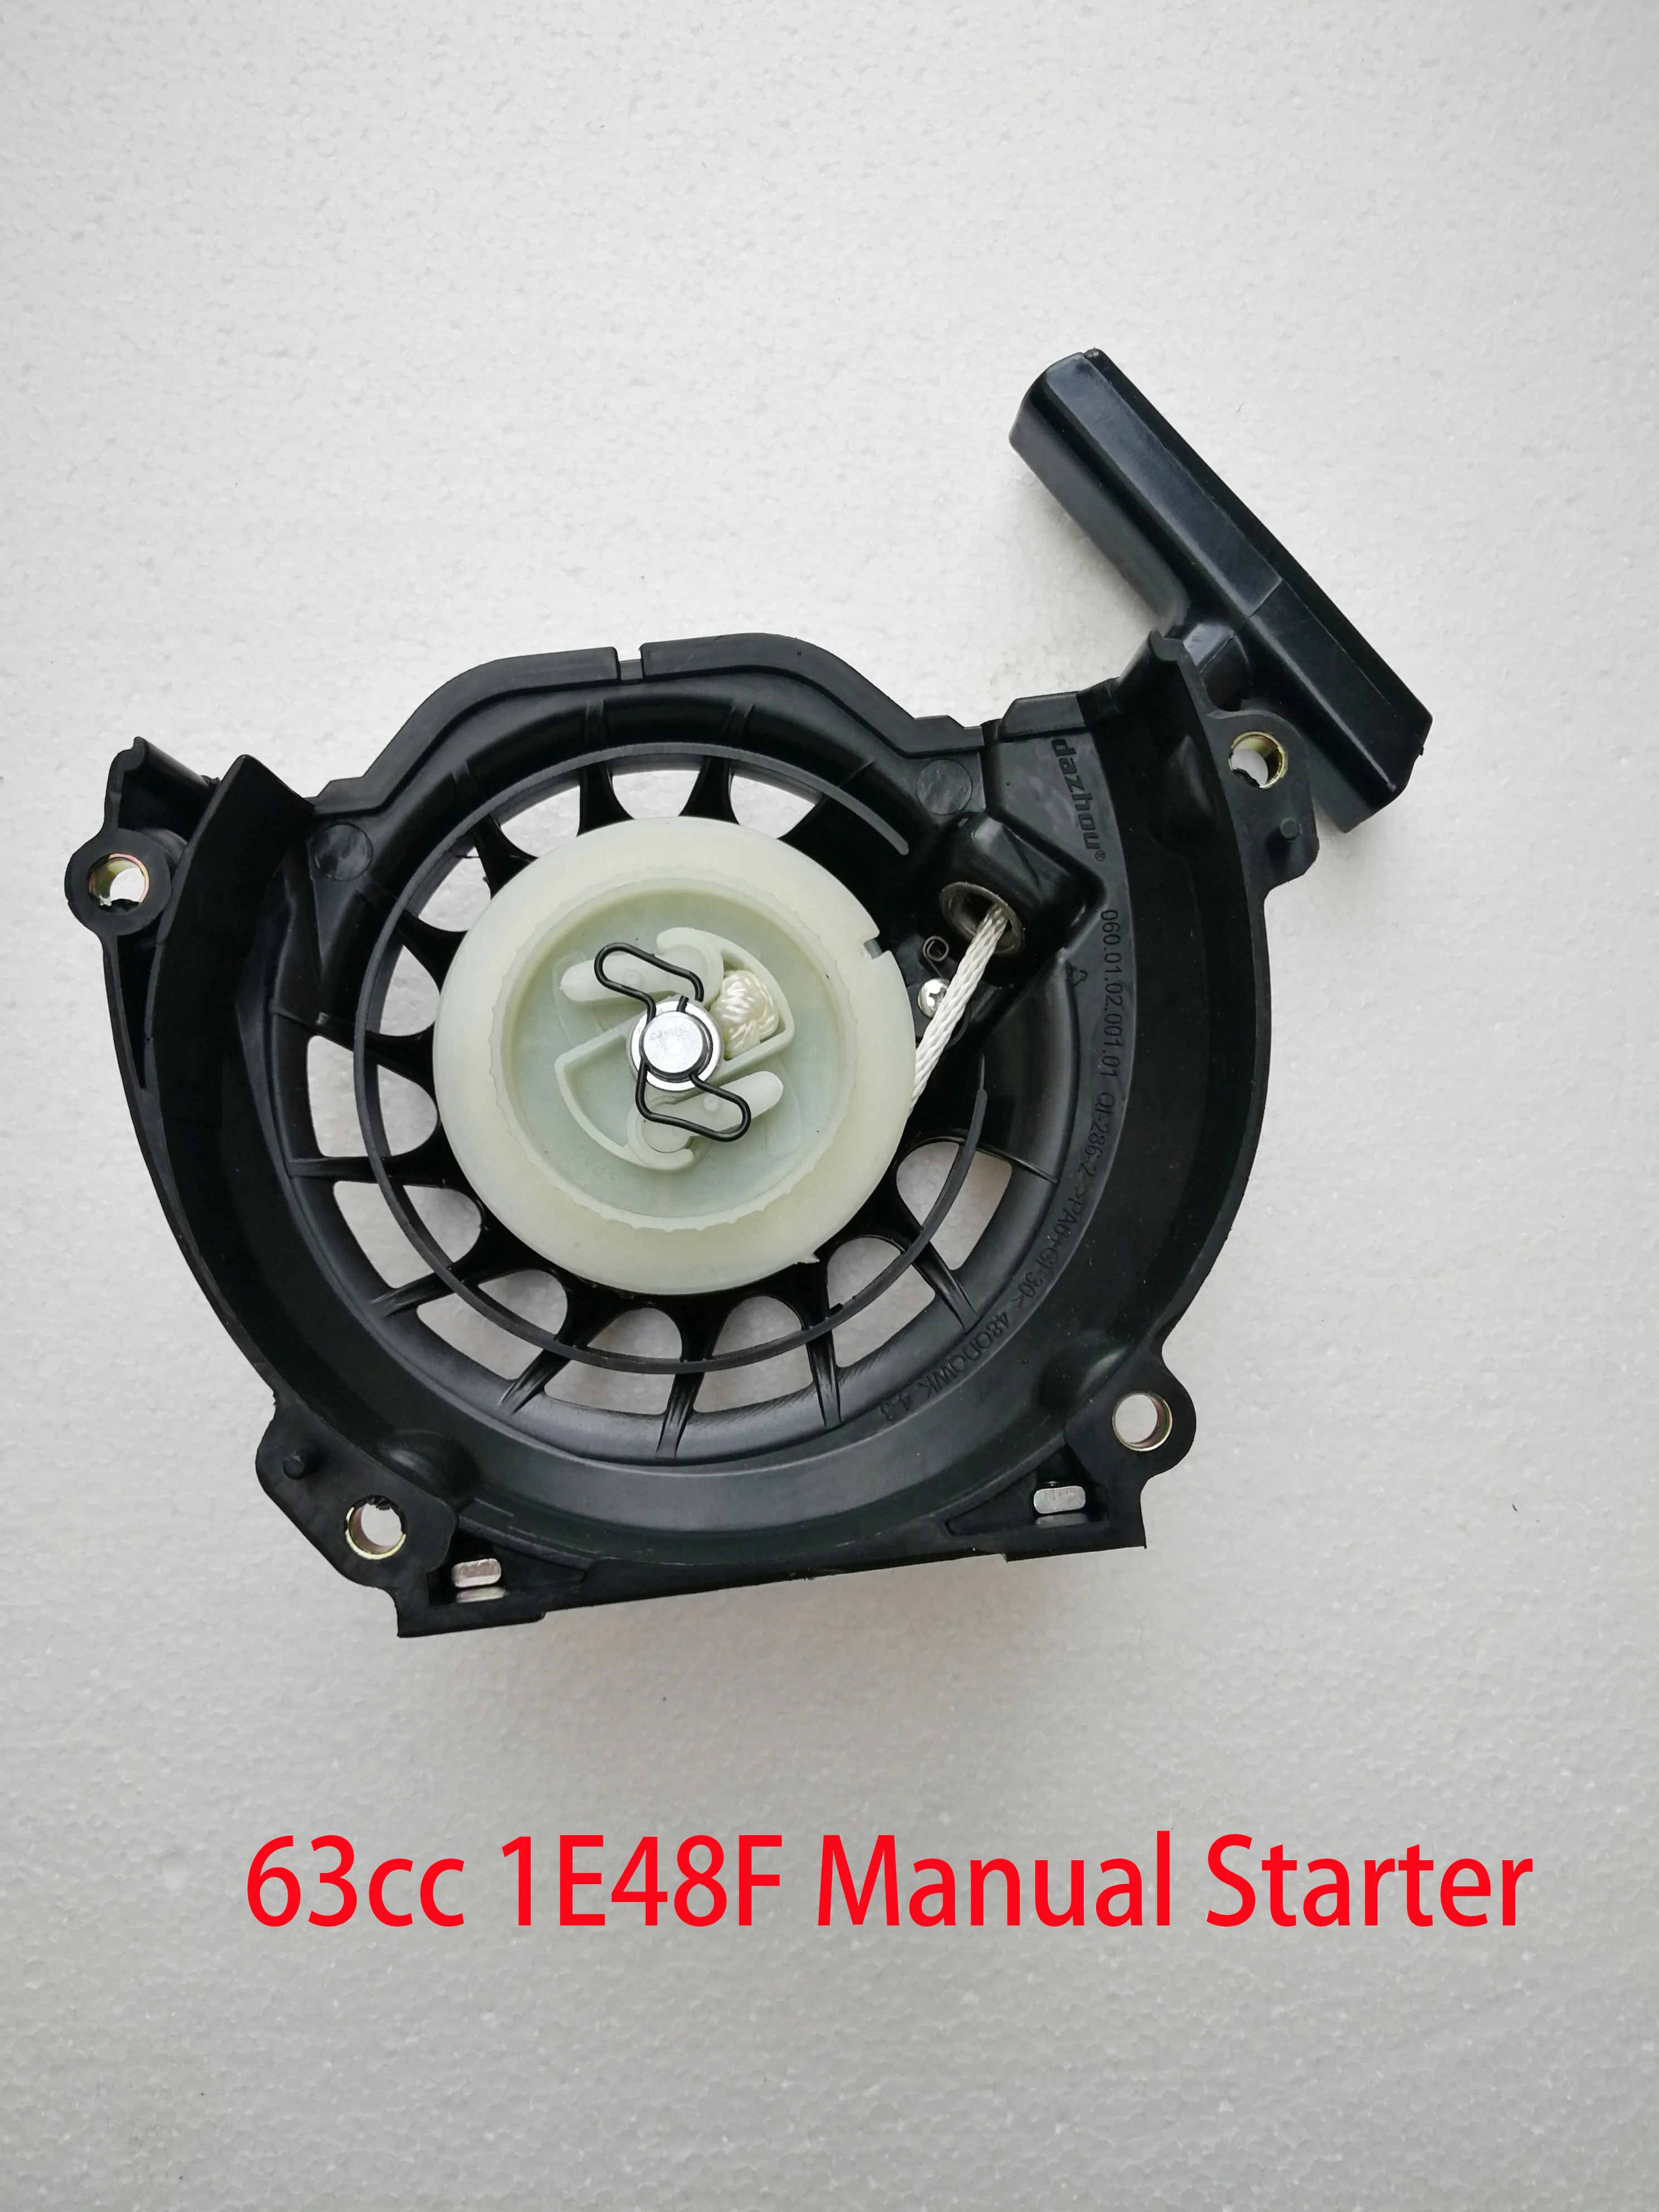 Durable DaZhou Black Color Manual Puller Recoil Starter For 2T GD630 63cc 1E48F 80CC 1E53F Brush Cutter Earth Drill Goped Engine